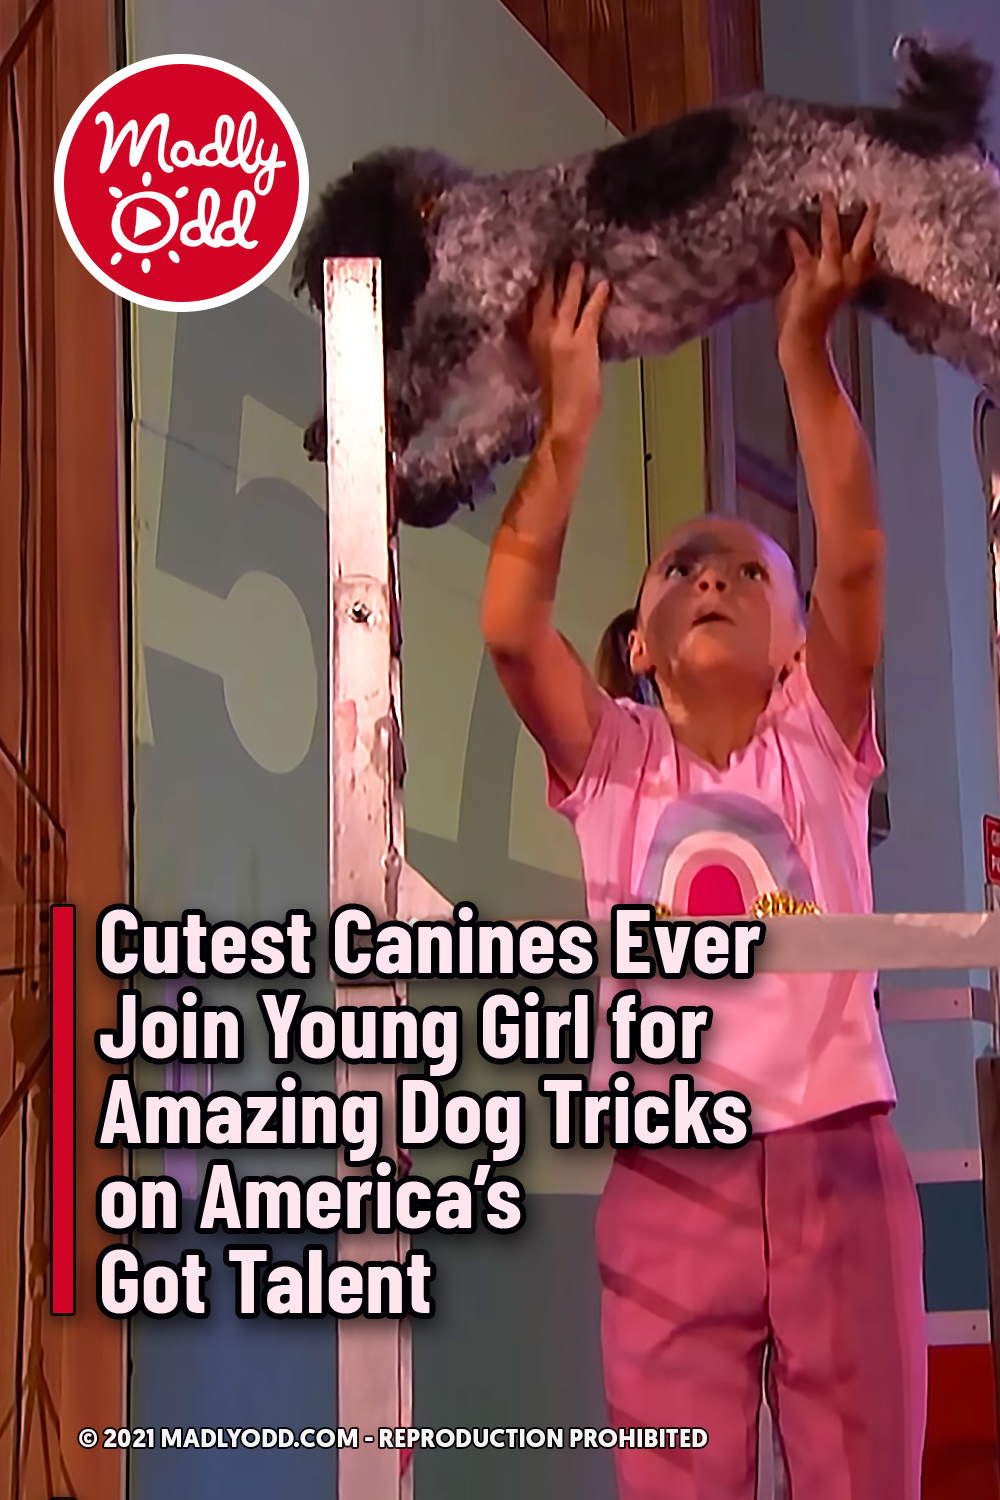 Cutest Canines Ever Join Young Girl for Amazing Dog Tricks on America’s Got Talent